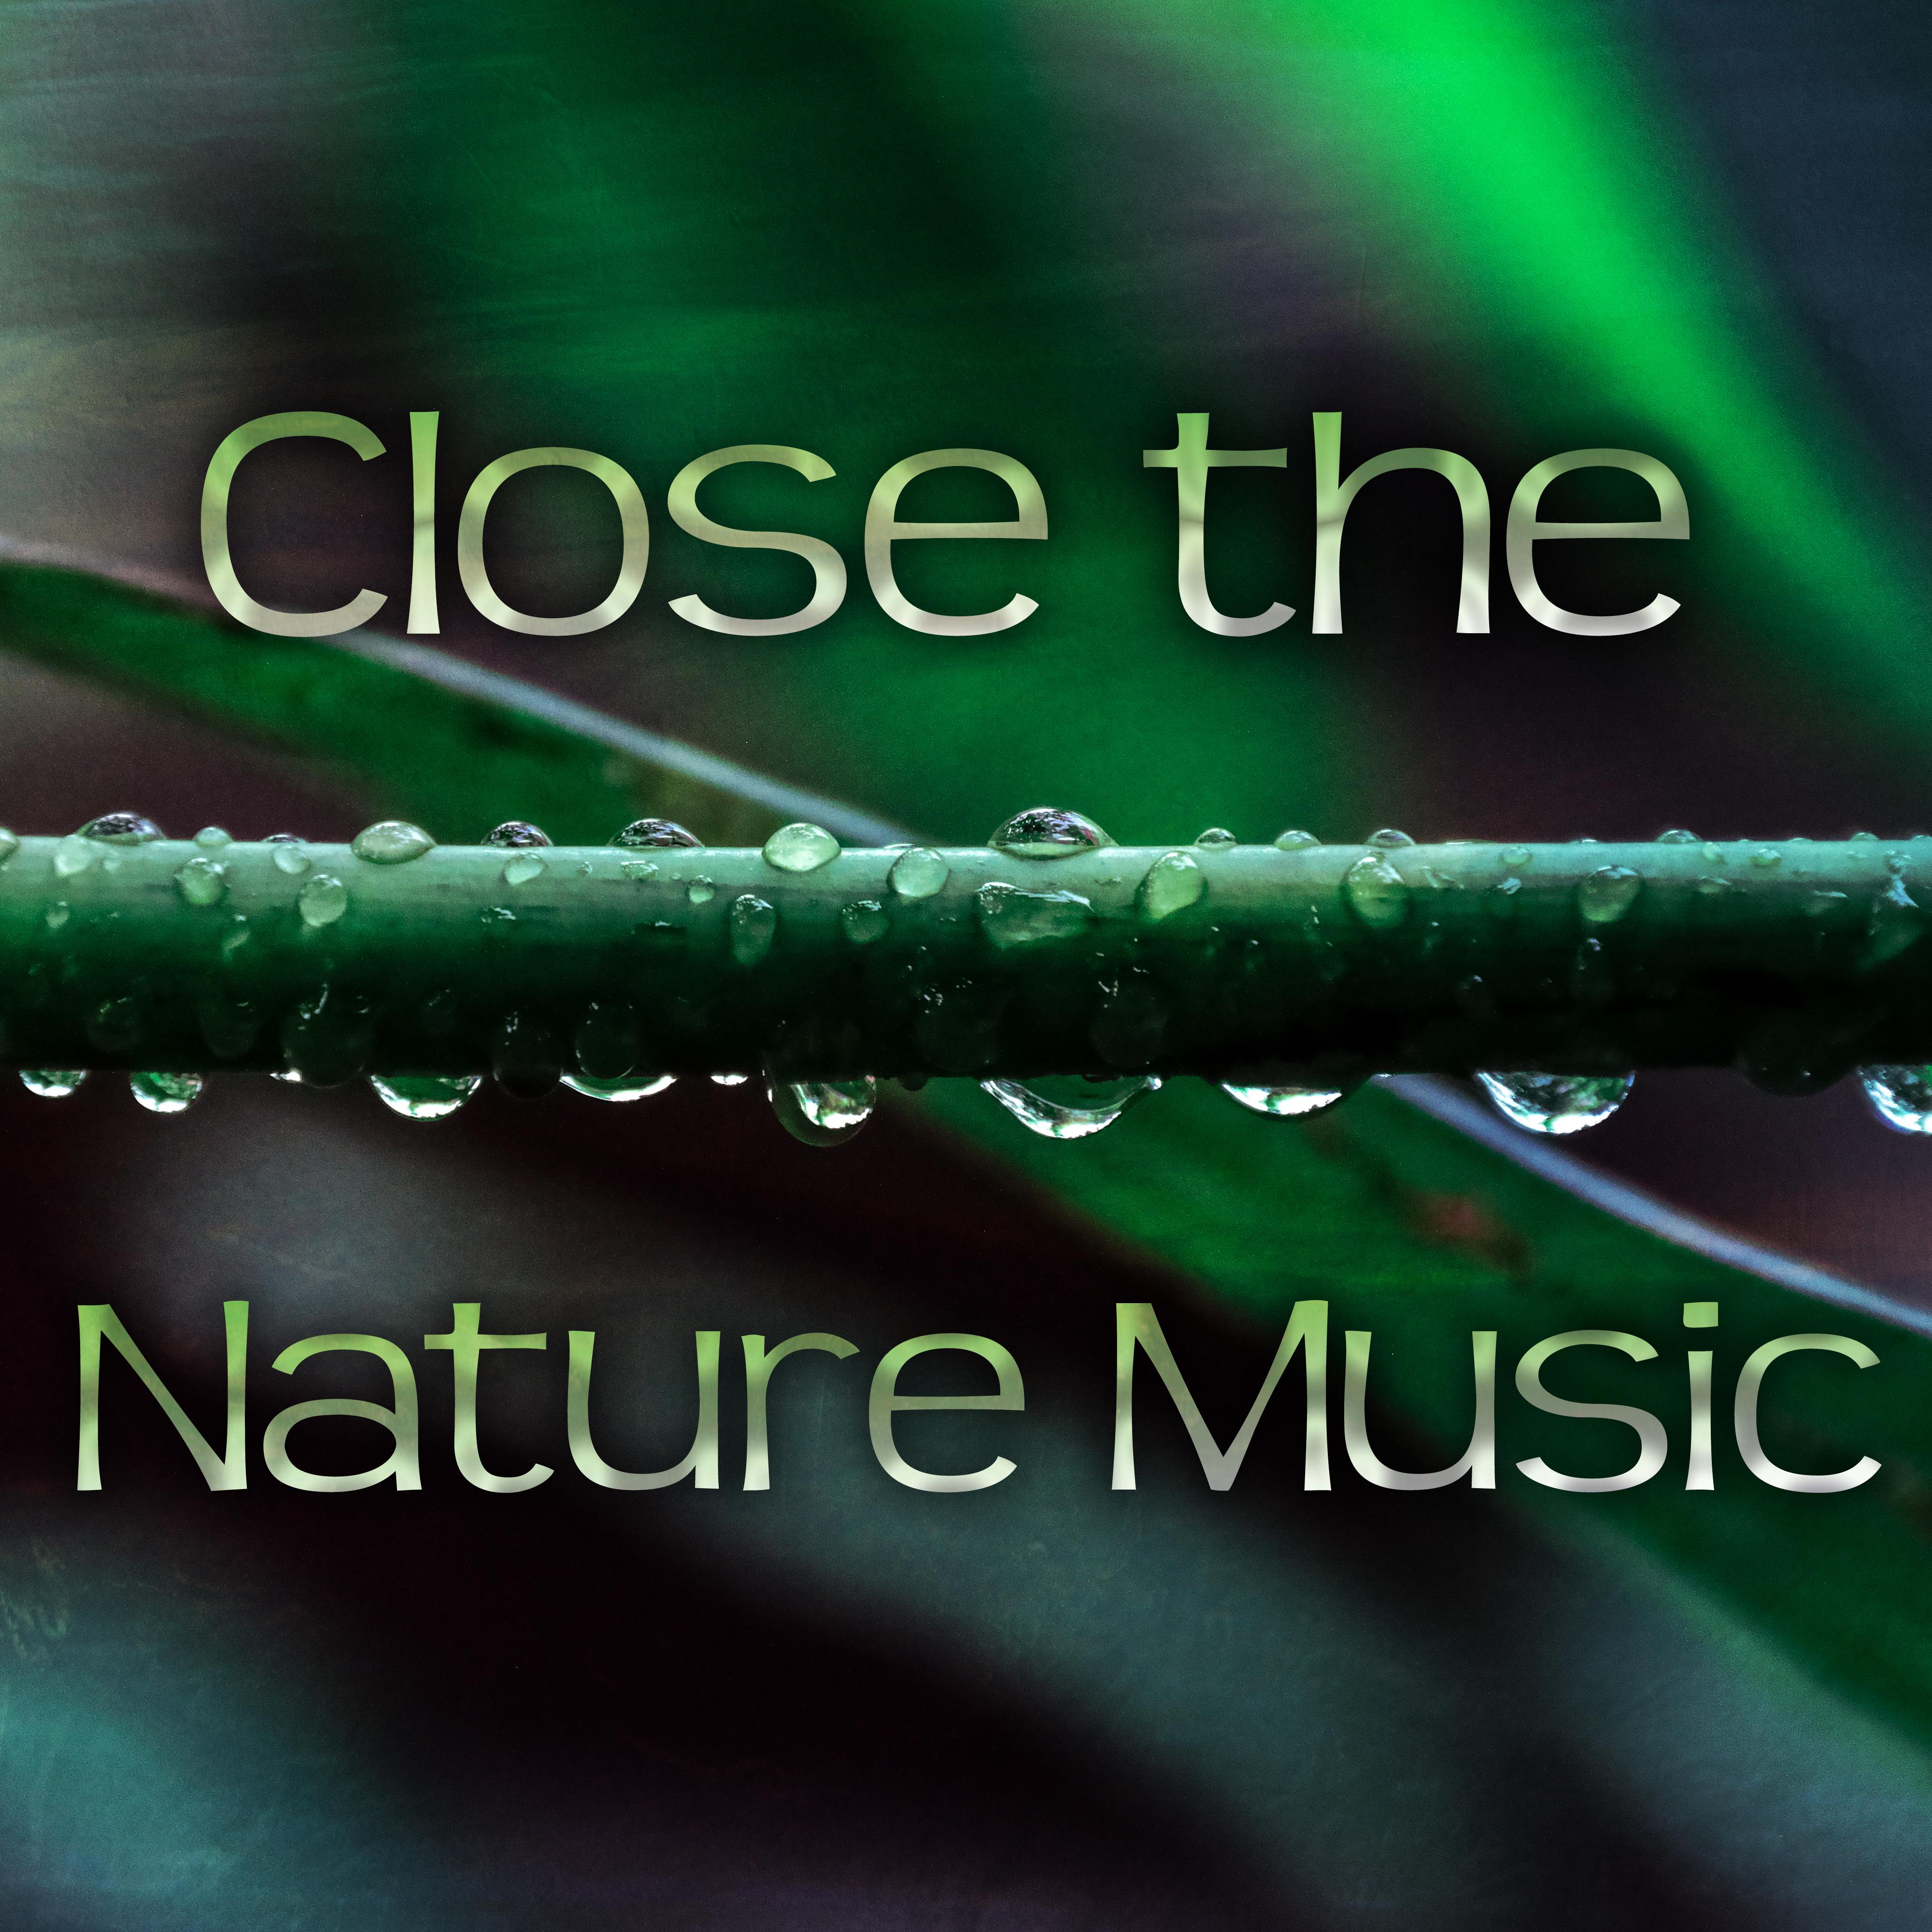 Close the Nature Music  New Age Music for Total Relaxation, Massage Therapy, Yoga, Pilates, Spa, Nature Sounds